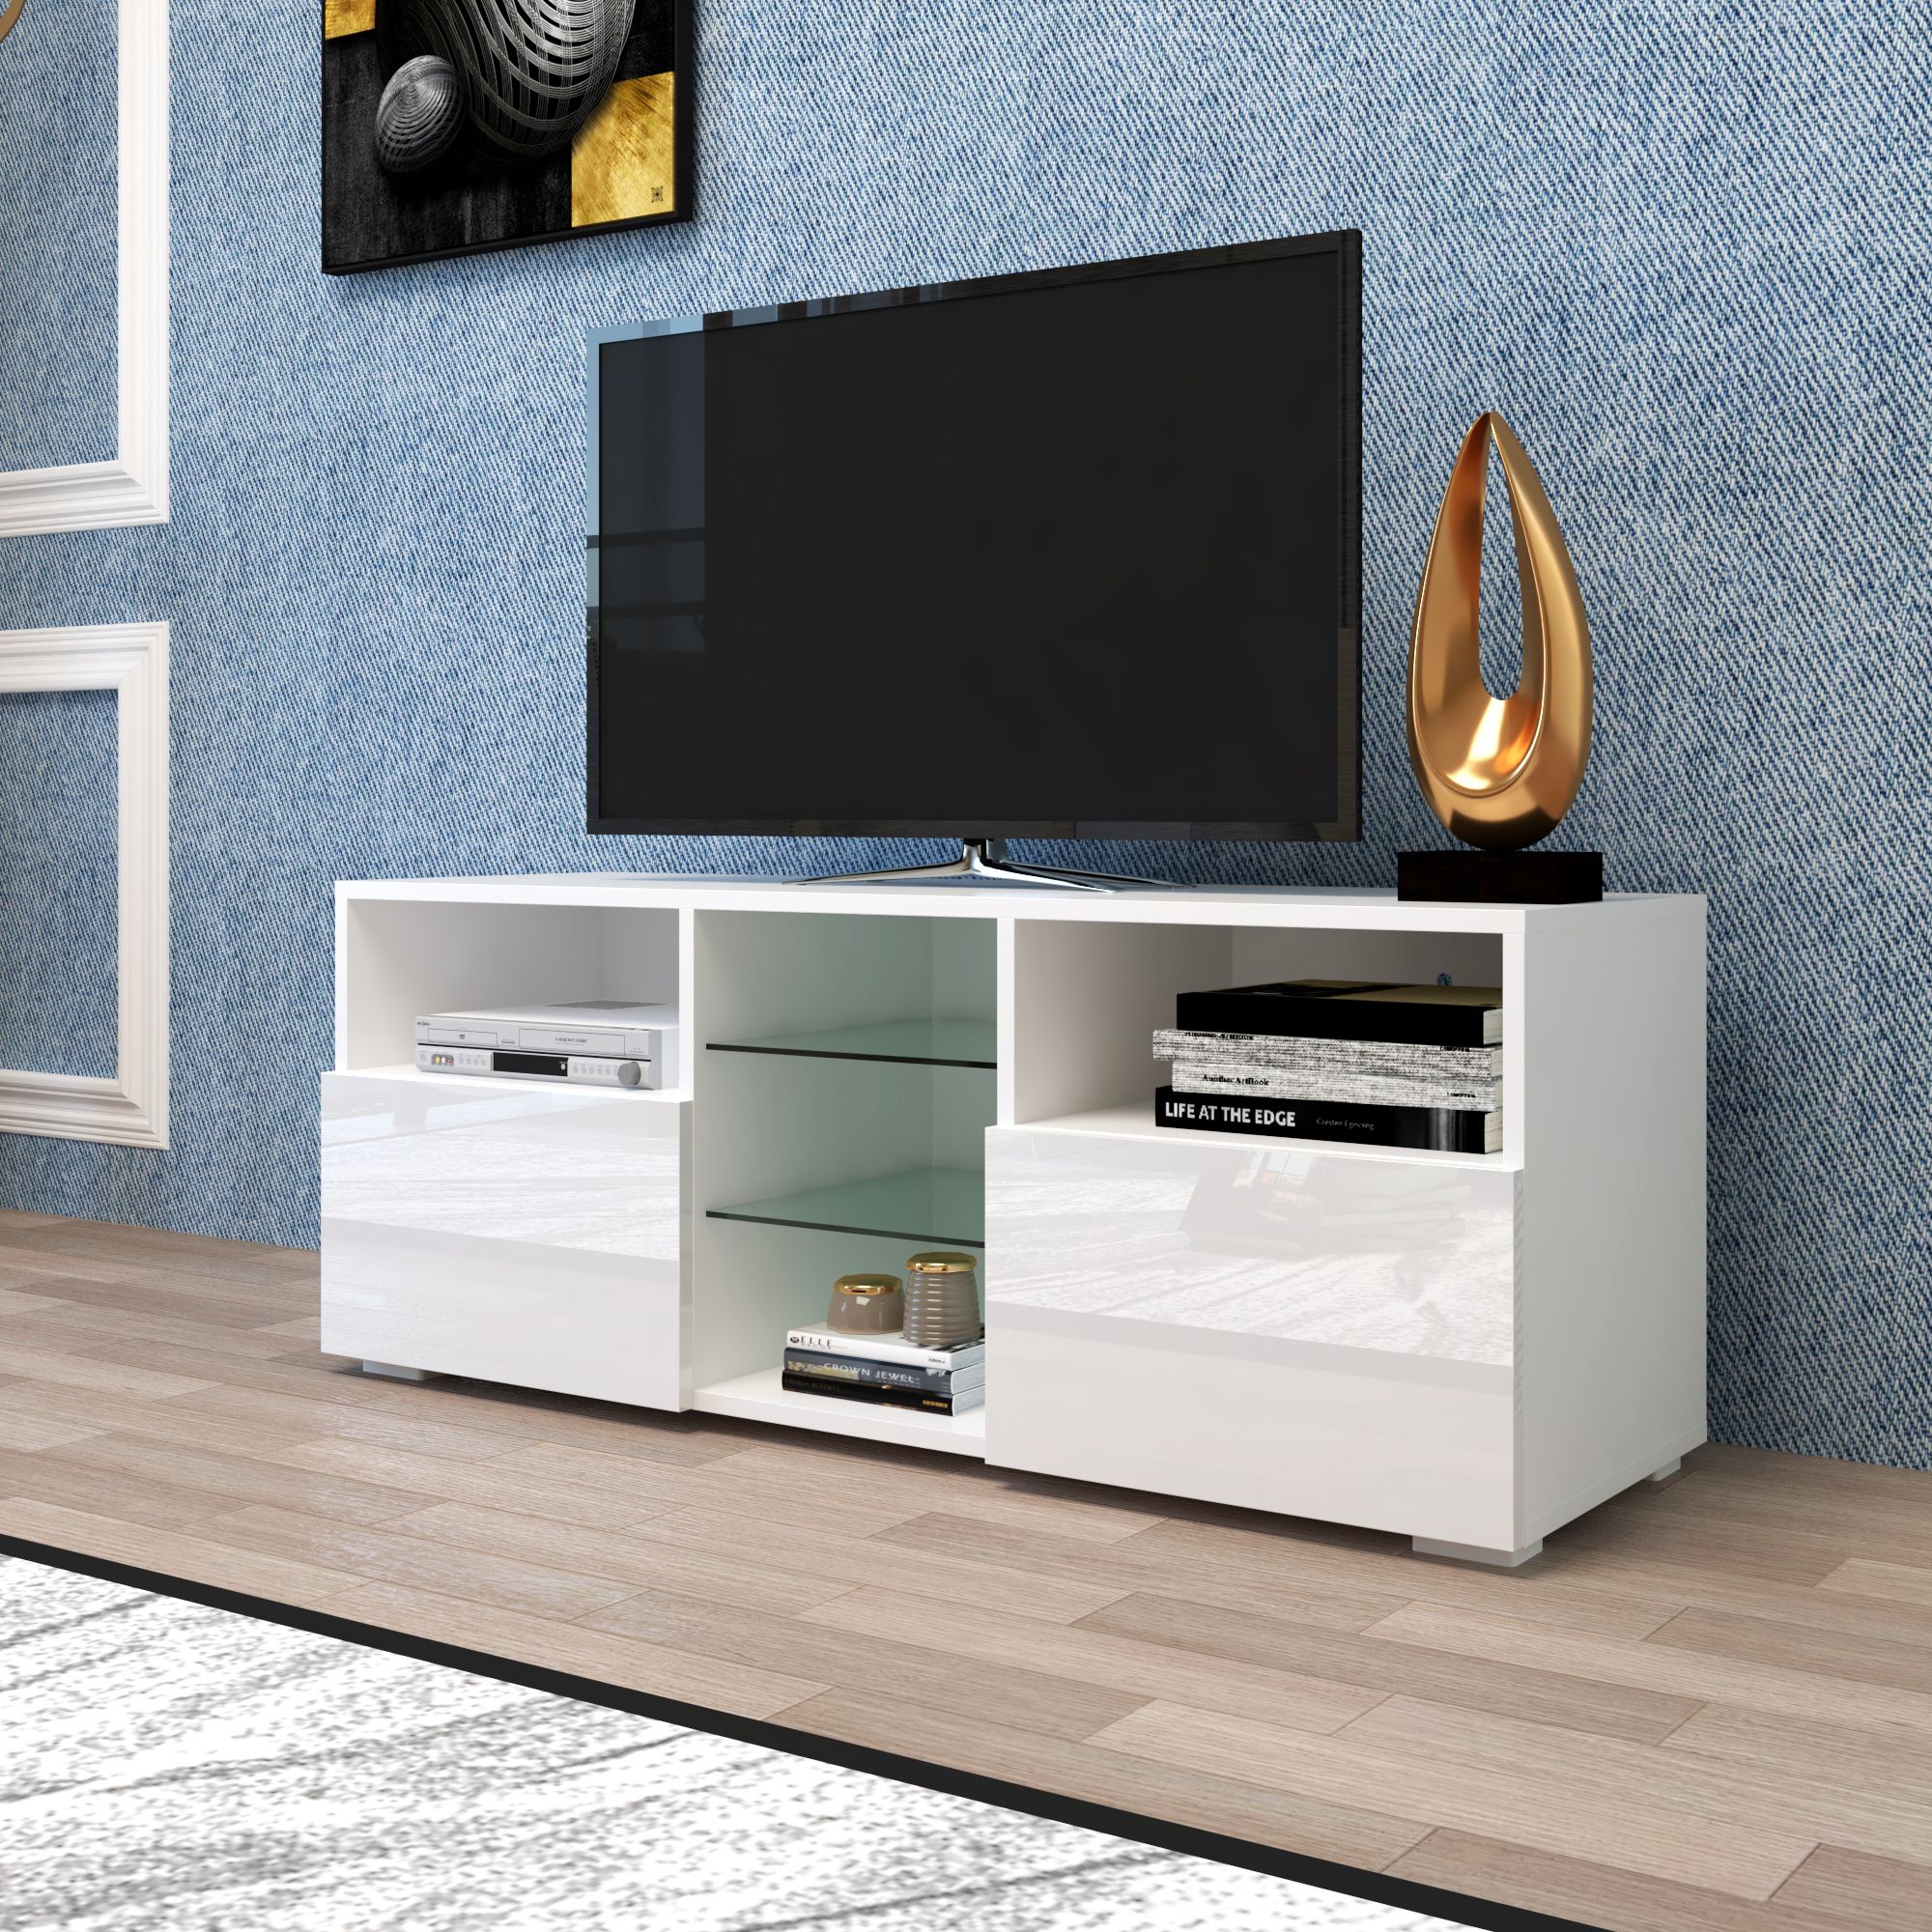 Yofe Tv Entertainment Center For Up To 65 Inch Tv, High Pertaining To Wolla Tv Stands For Tvs Up To 65" (View 9 of 15)